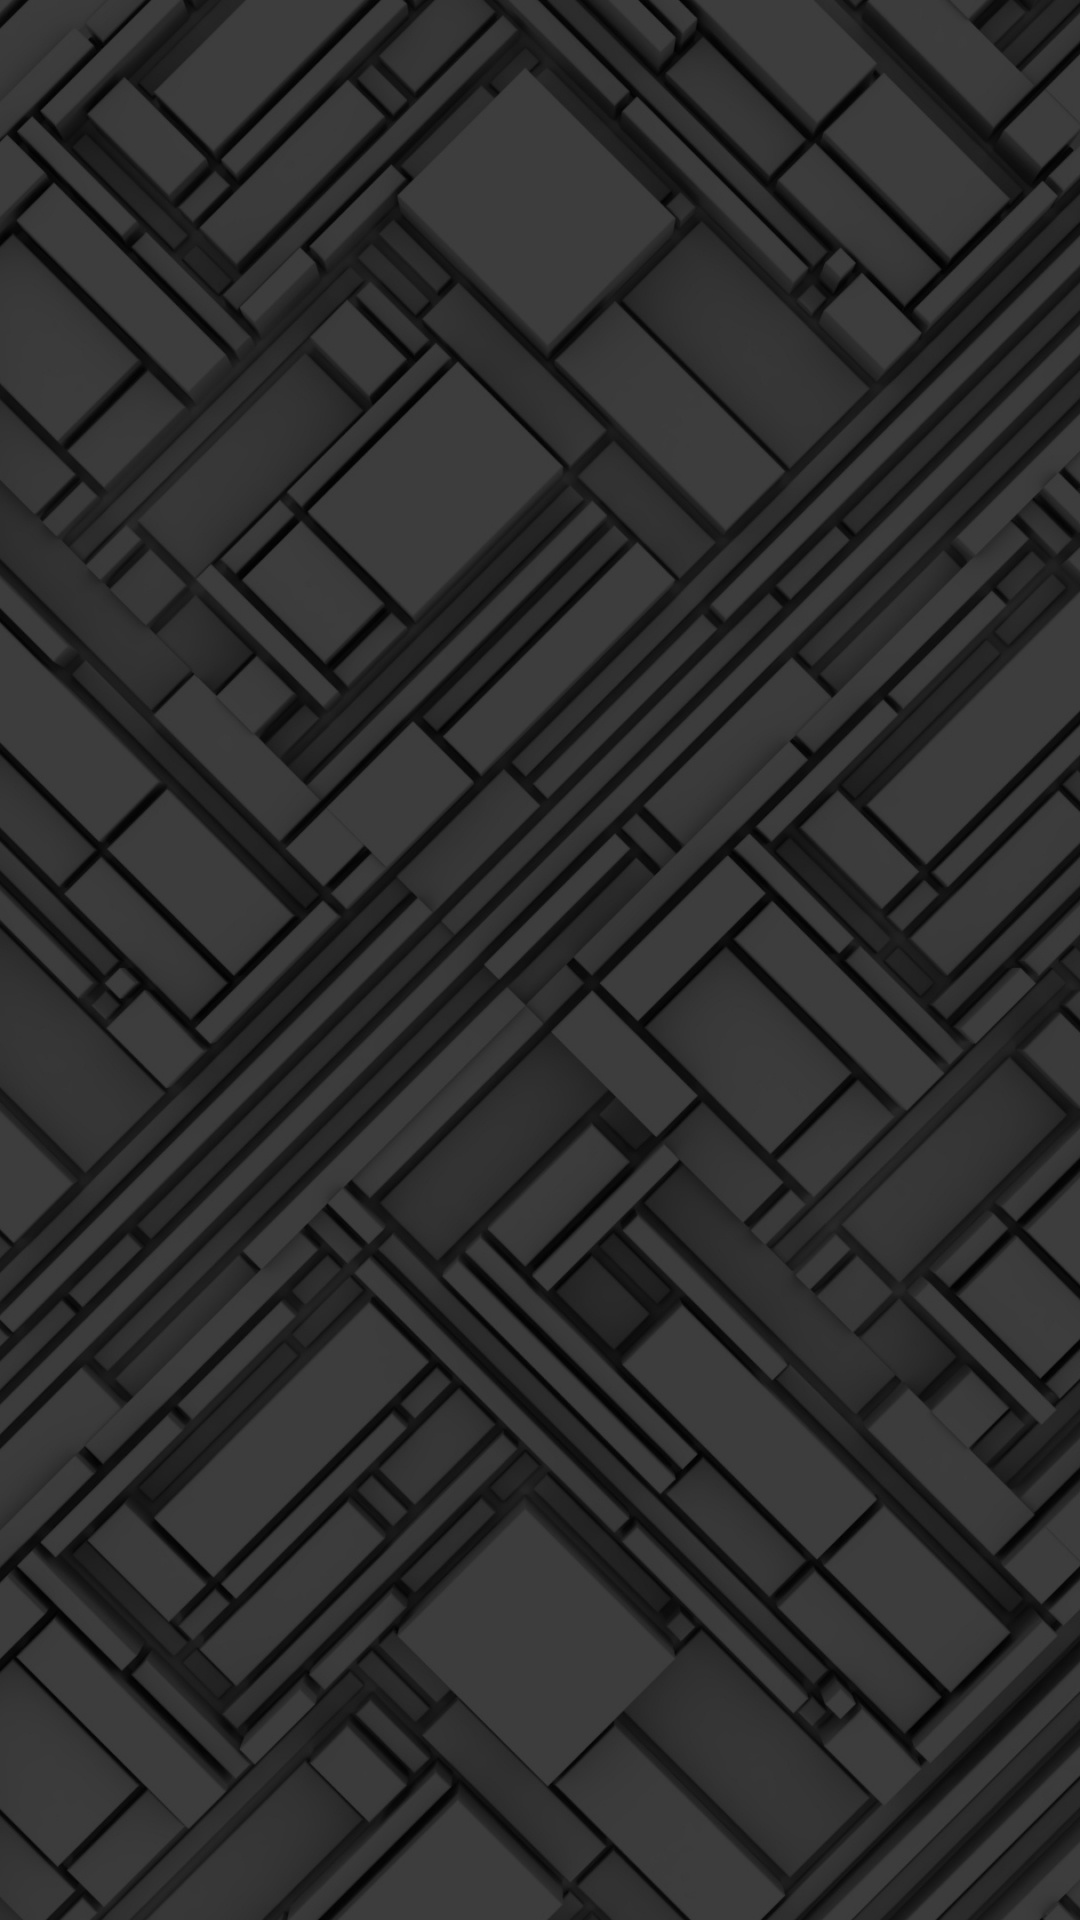 Black and White Checkered Textile. Wallpaper in 1080x1920 Resolution